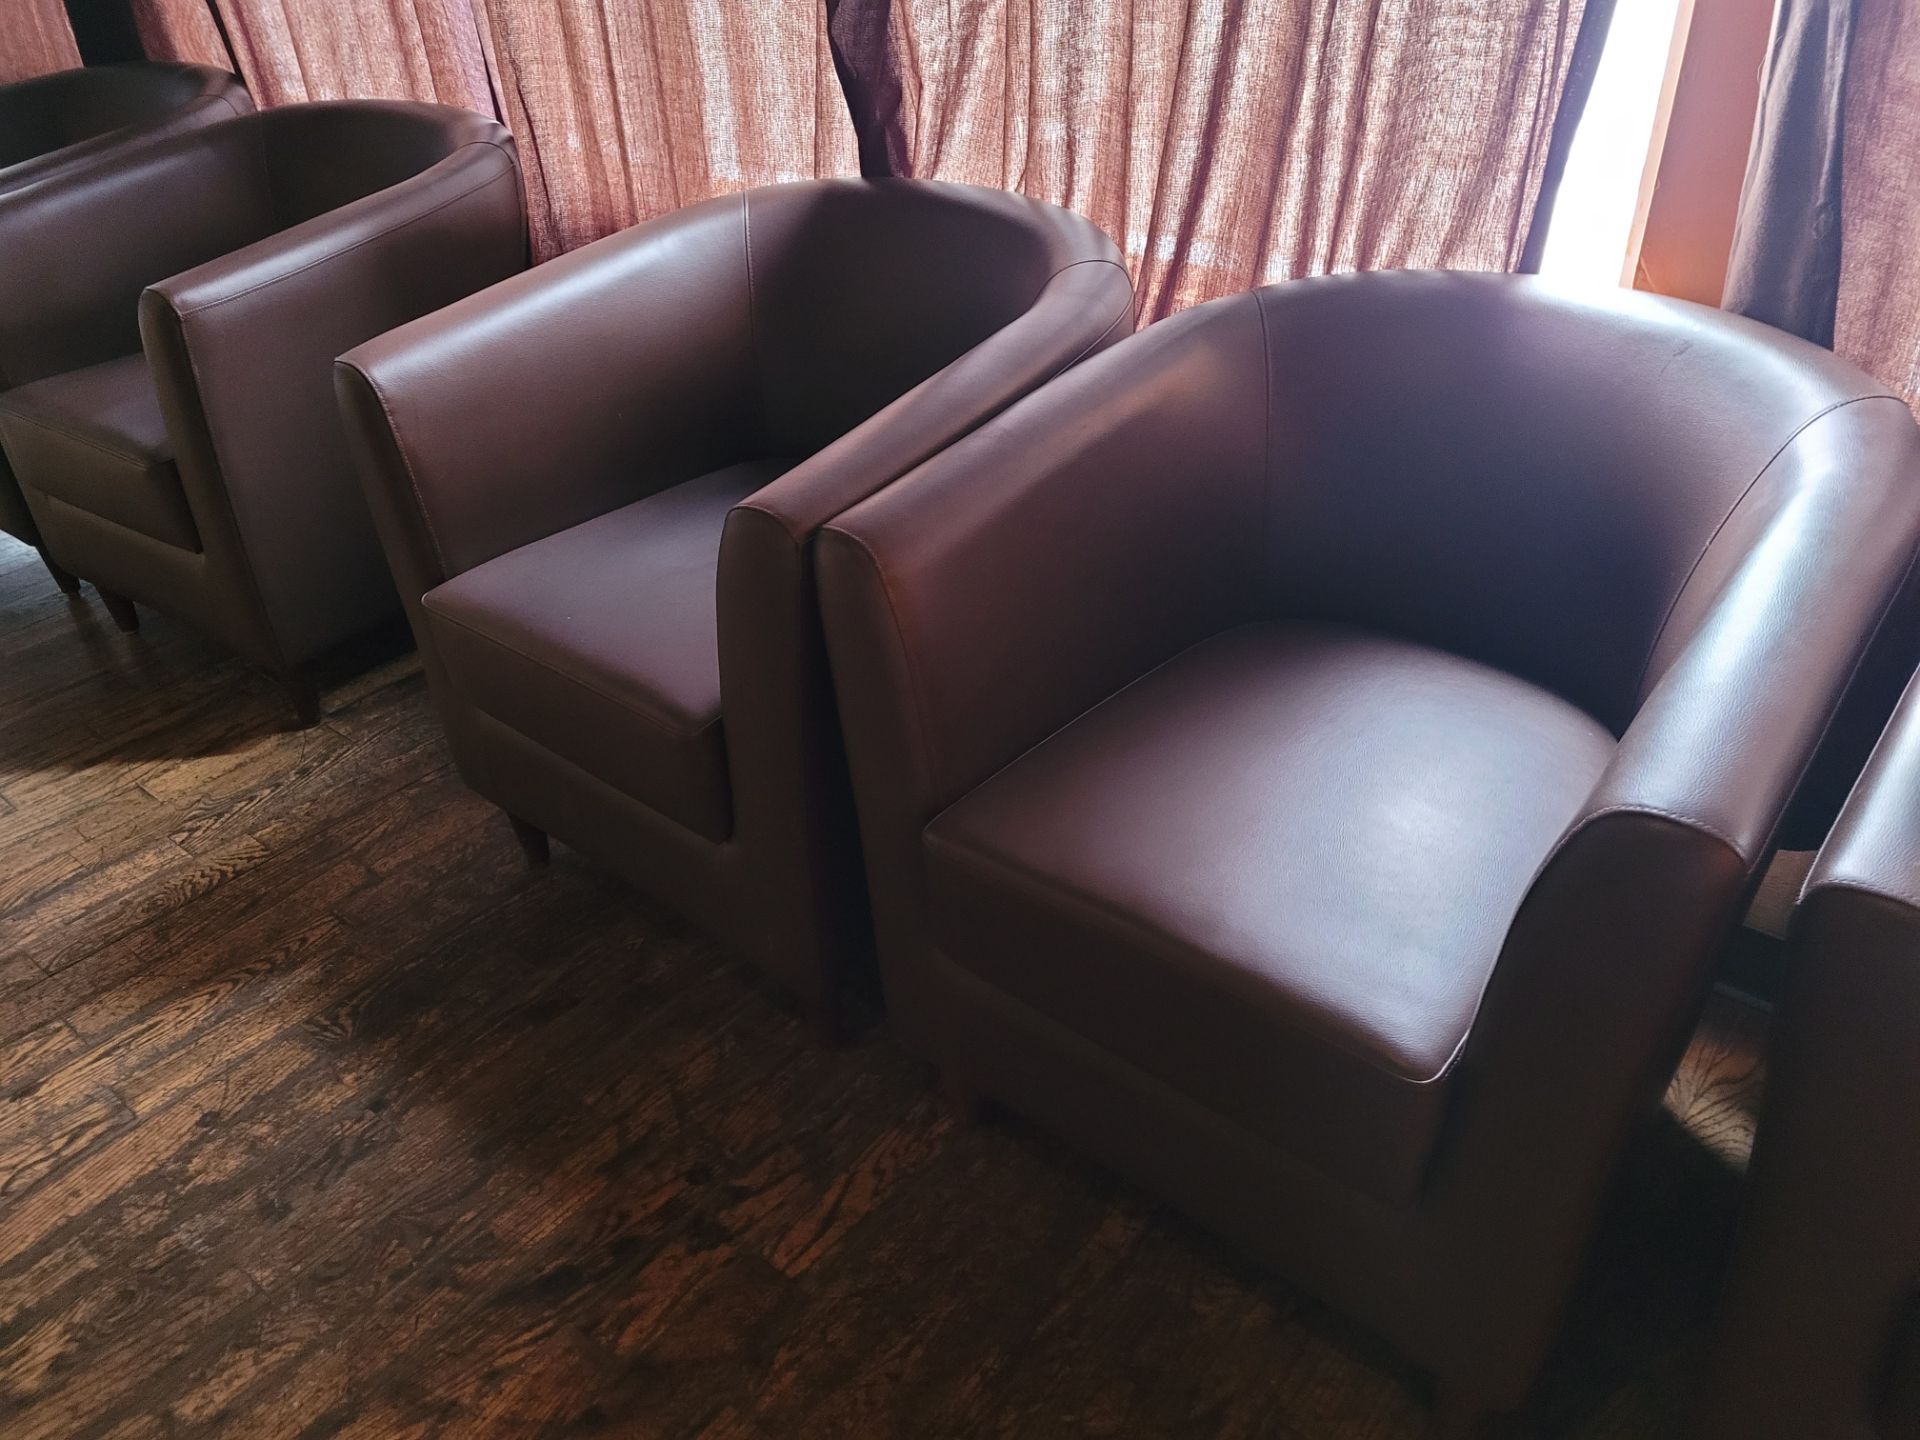 Genuine leather armchairs - Image 2 of 4